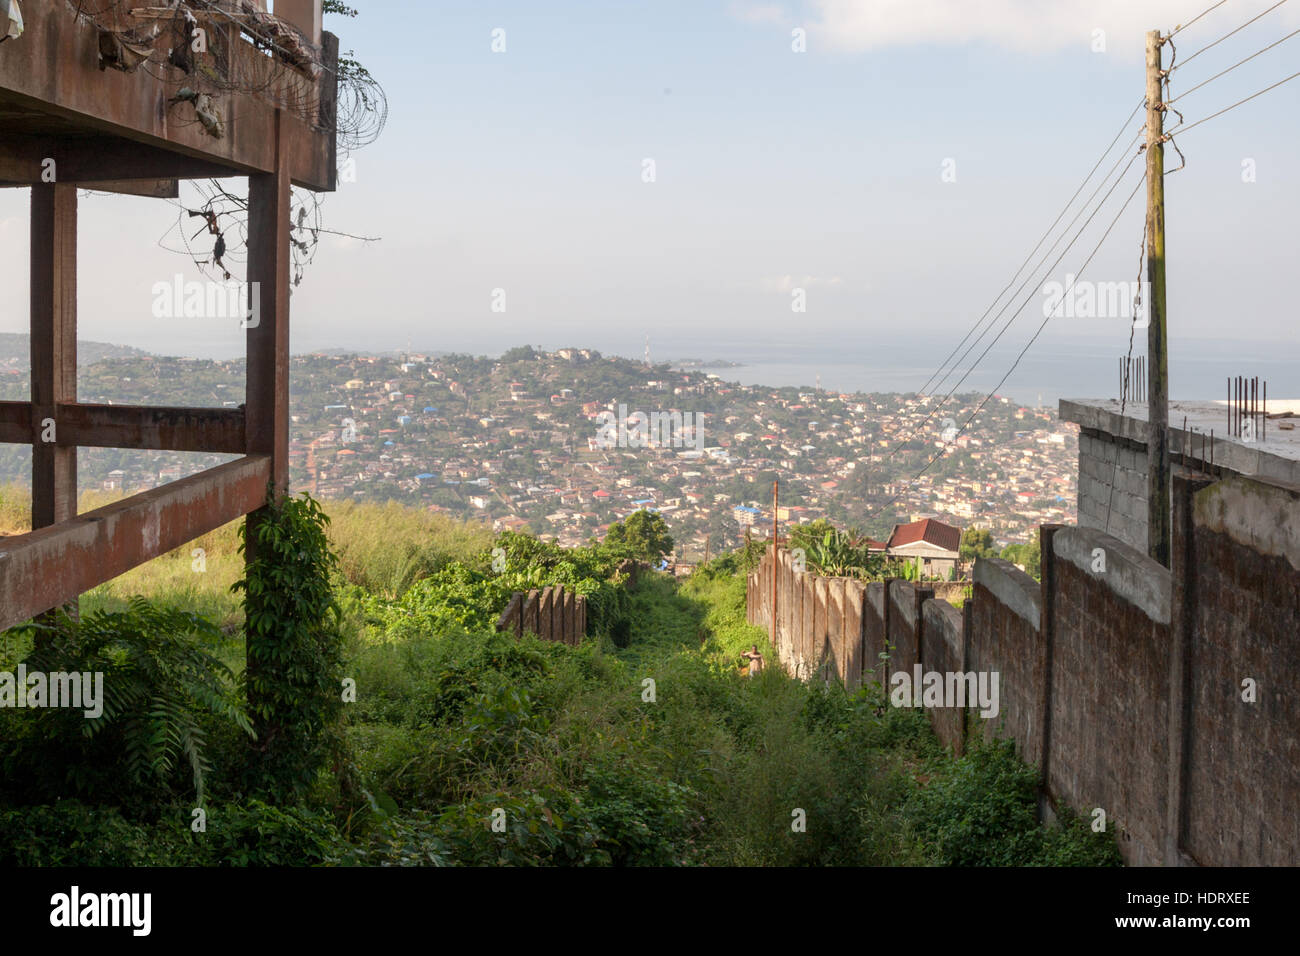 Freetown bay seen from the hill in Sierra Leone Stock Photo